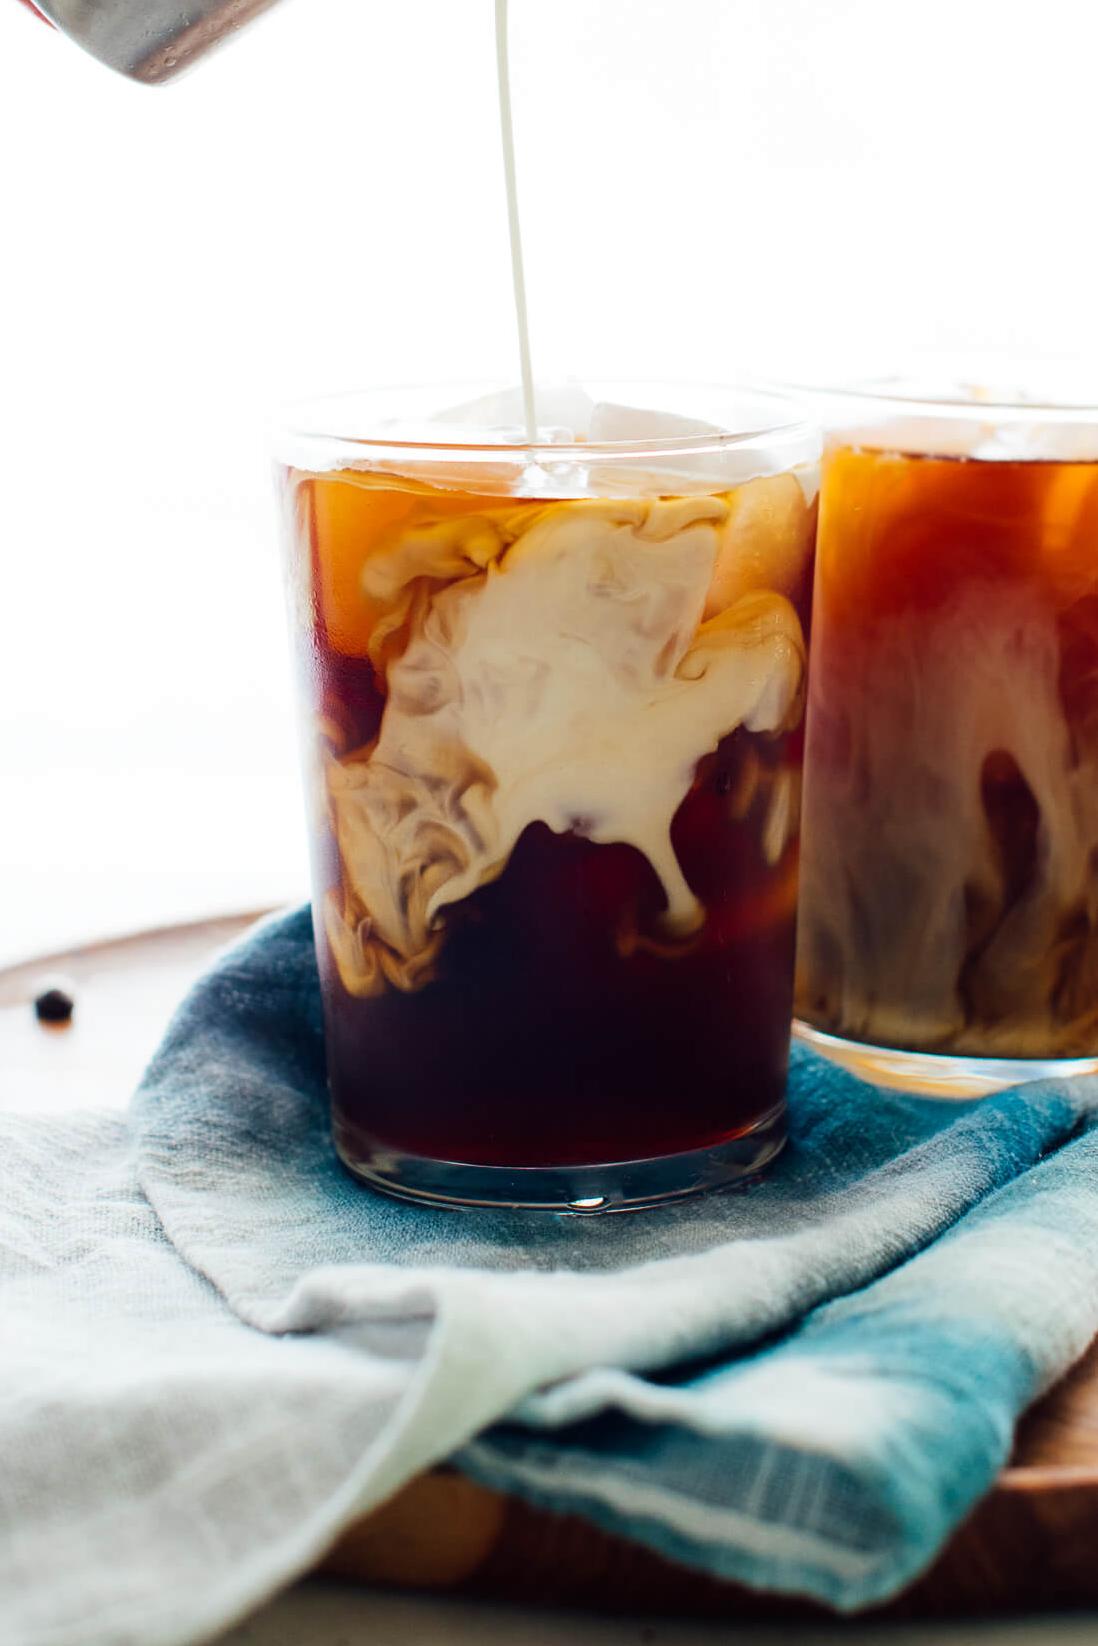  Wake up and smell the cold brew!